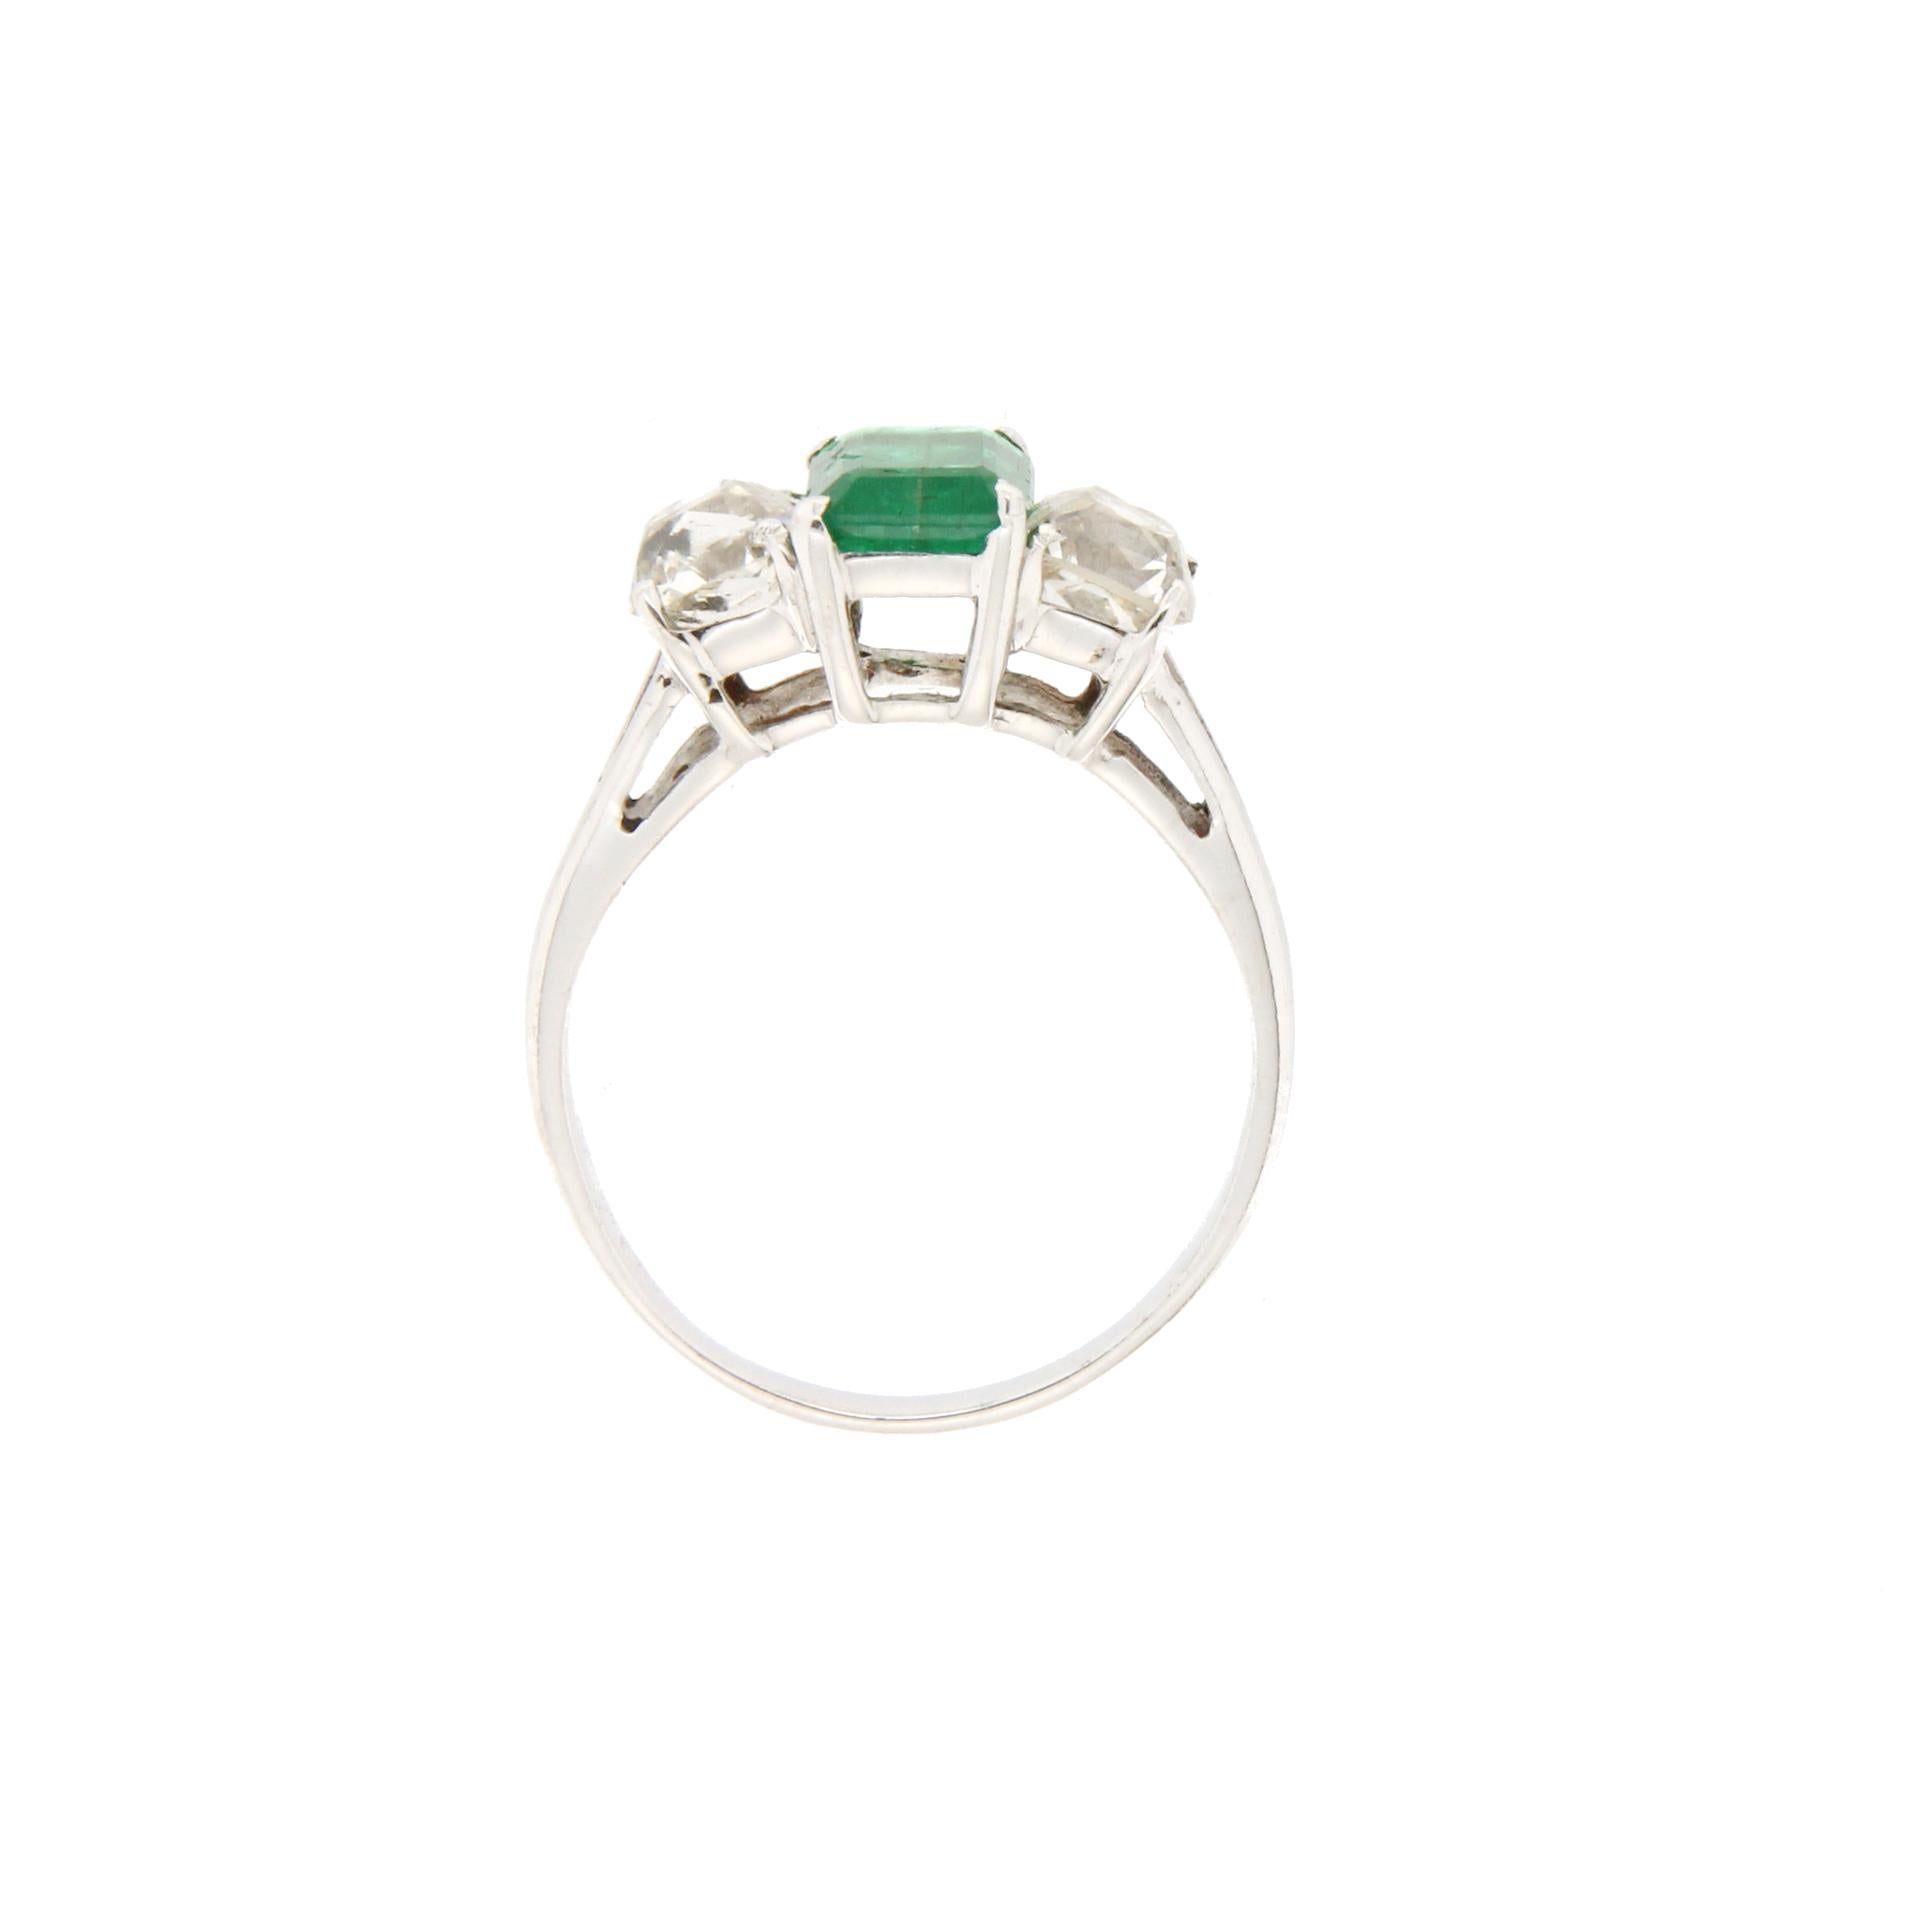 Emerald Cut Handcraft Colombian Emerald 18 Karat White Gold Diamonds Cocktail Ring For Sale